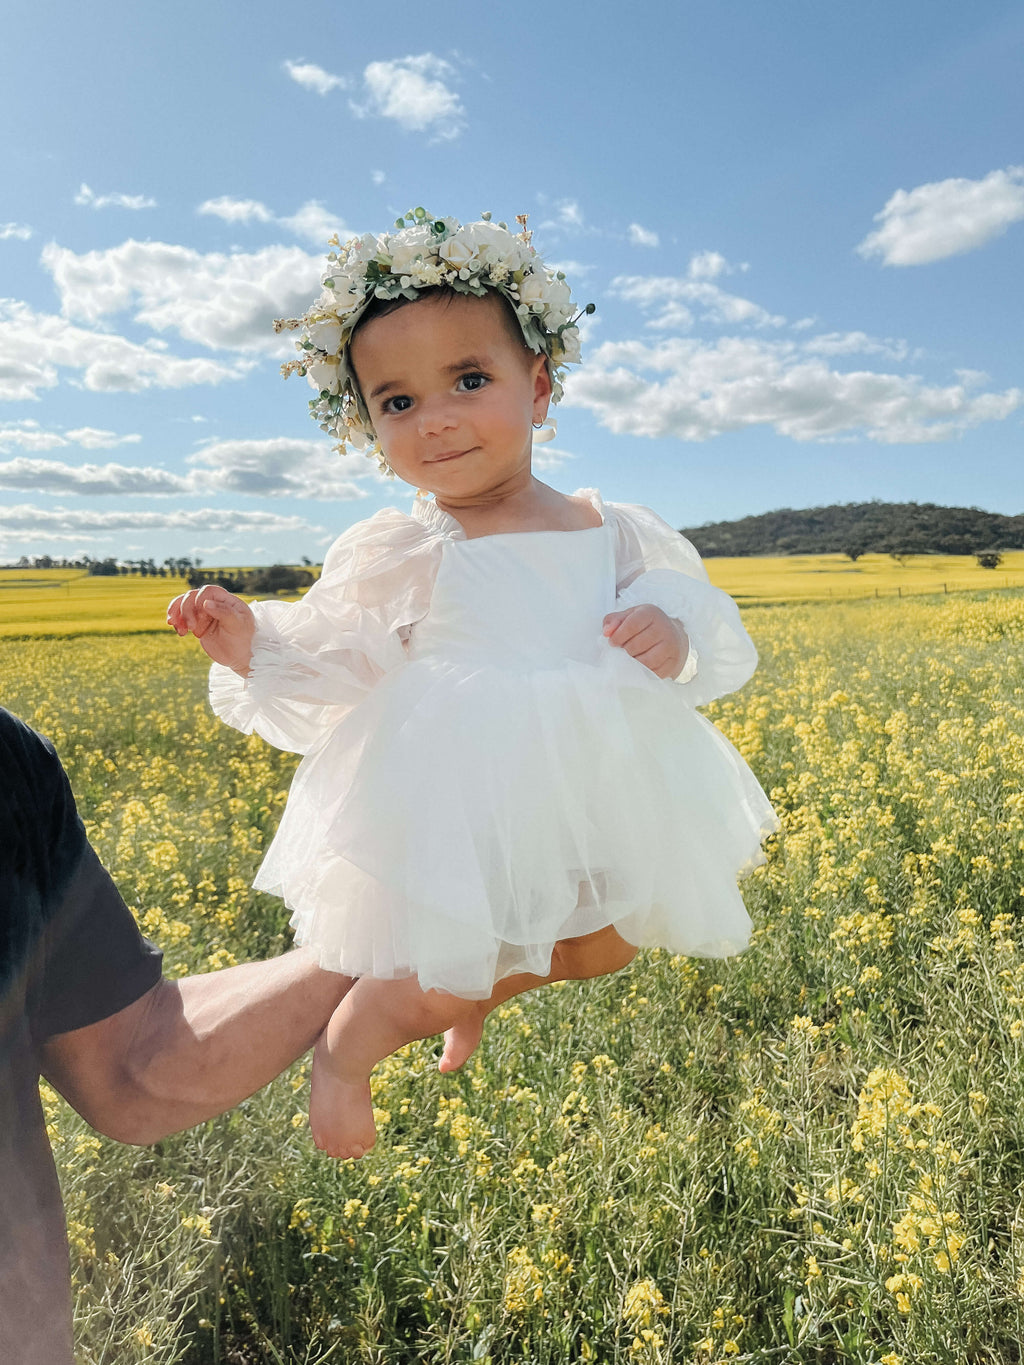 Eva baby flower girl dress is worn by a baby girl. She sits in a flower field holding a flower.